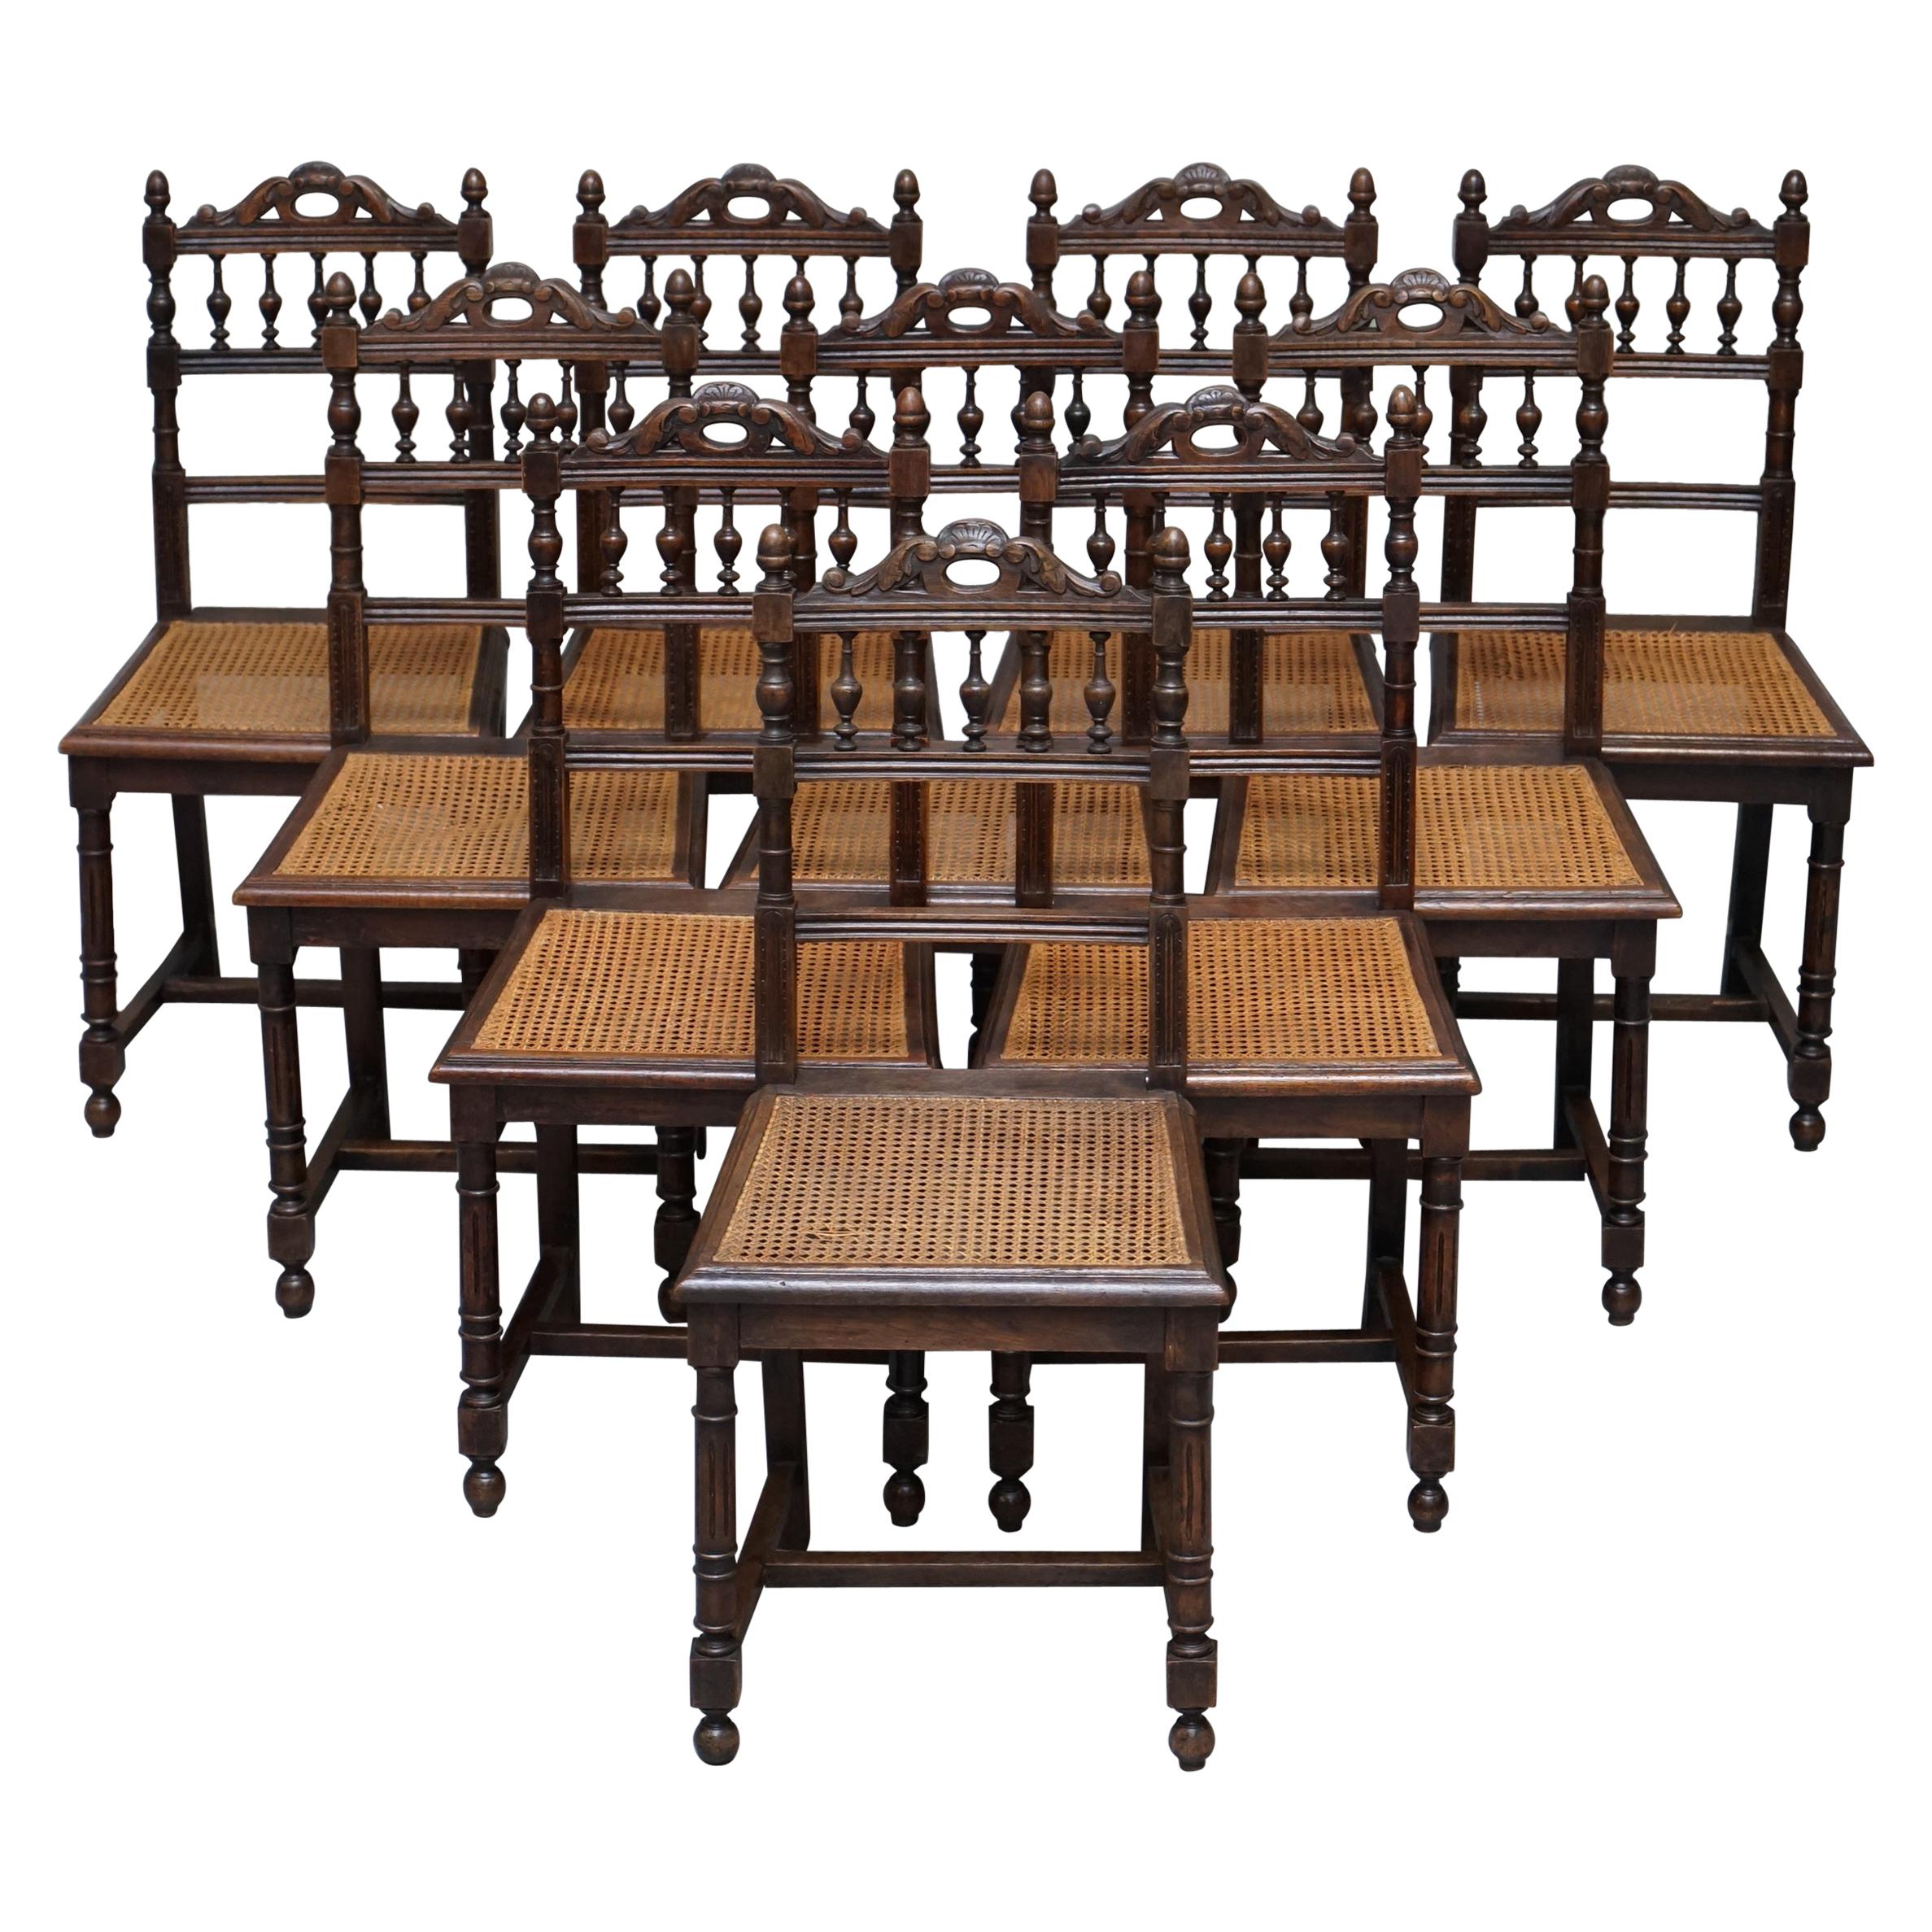 Set of 10 Original Victorian Carved Oak Dining Chairs with Berger Rattan Seats